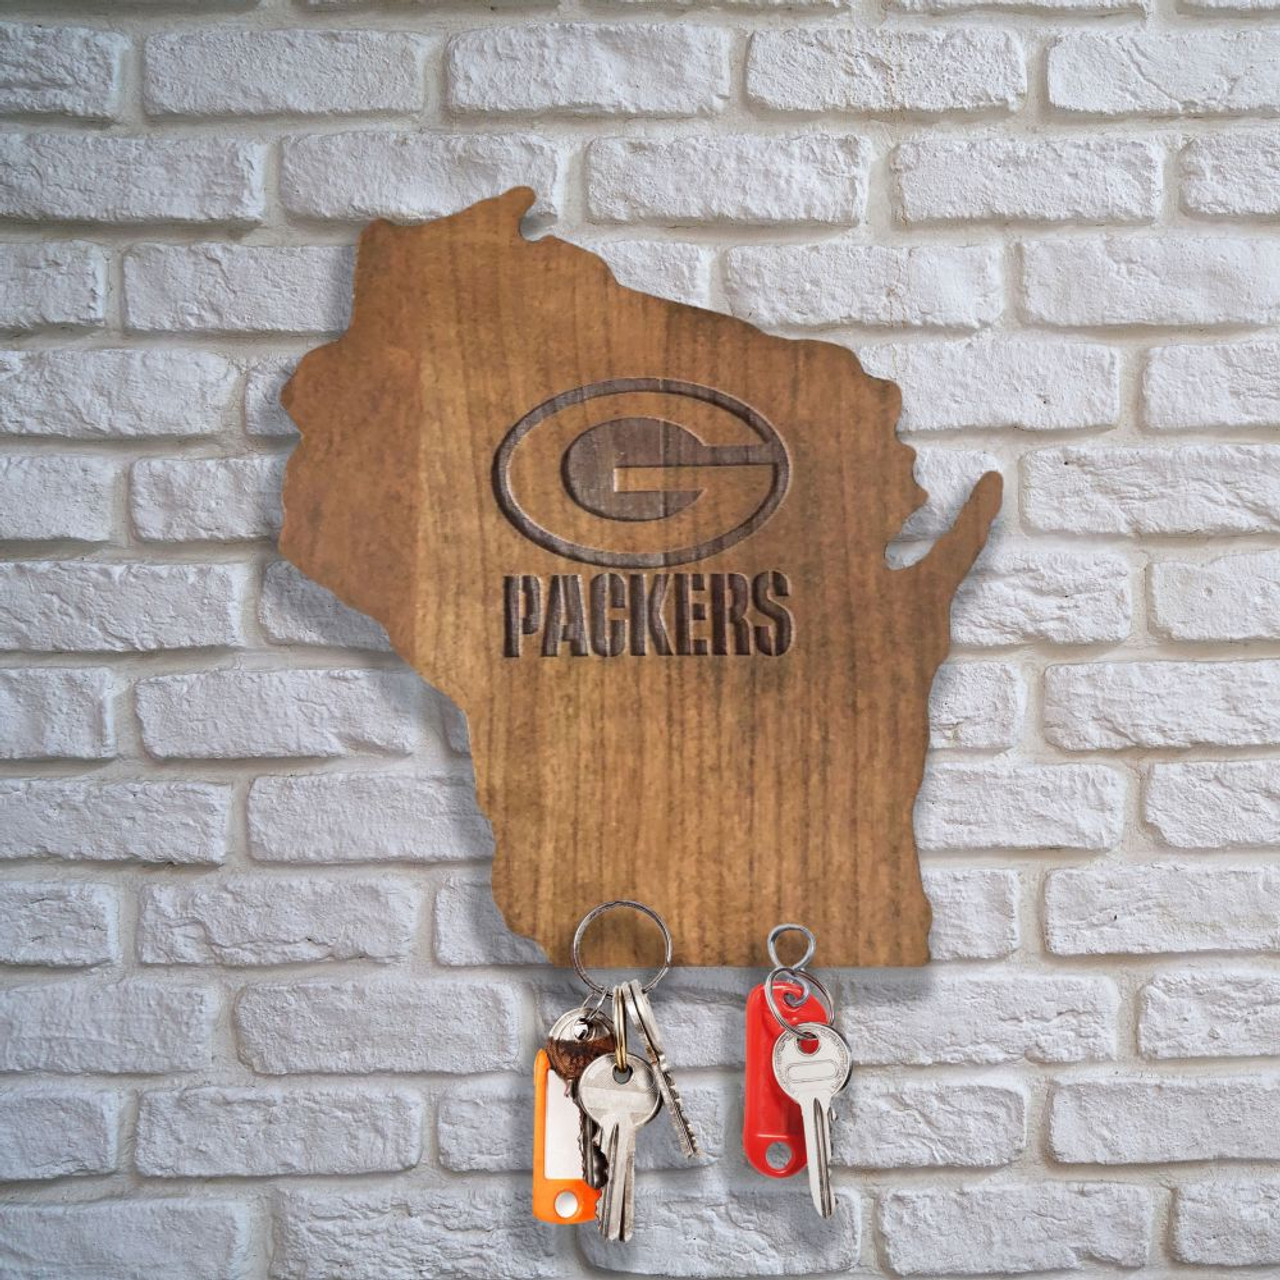 720801105673, 596-1001, Green Bay, GB, Packers, Wood, Wooden, Magnetic,  Keyholder, Key, Rack, NFL, Imperial